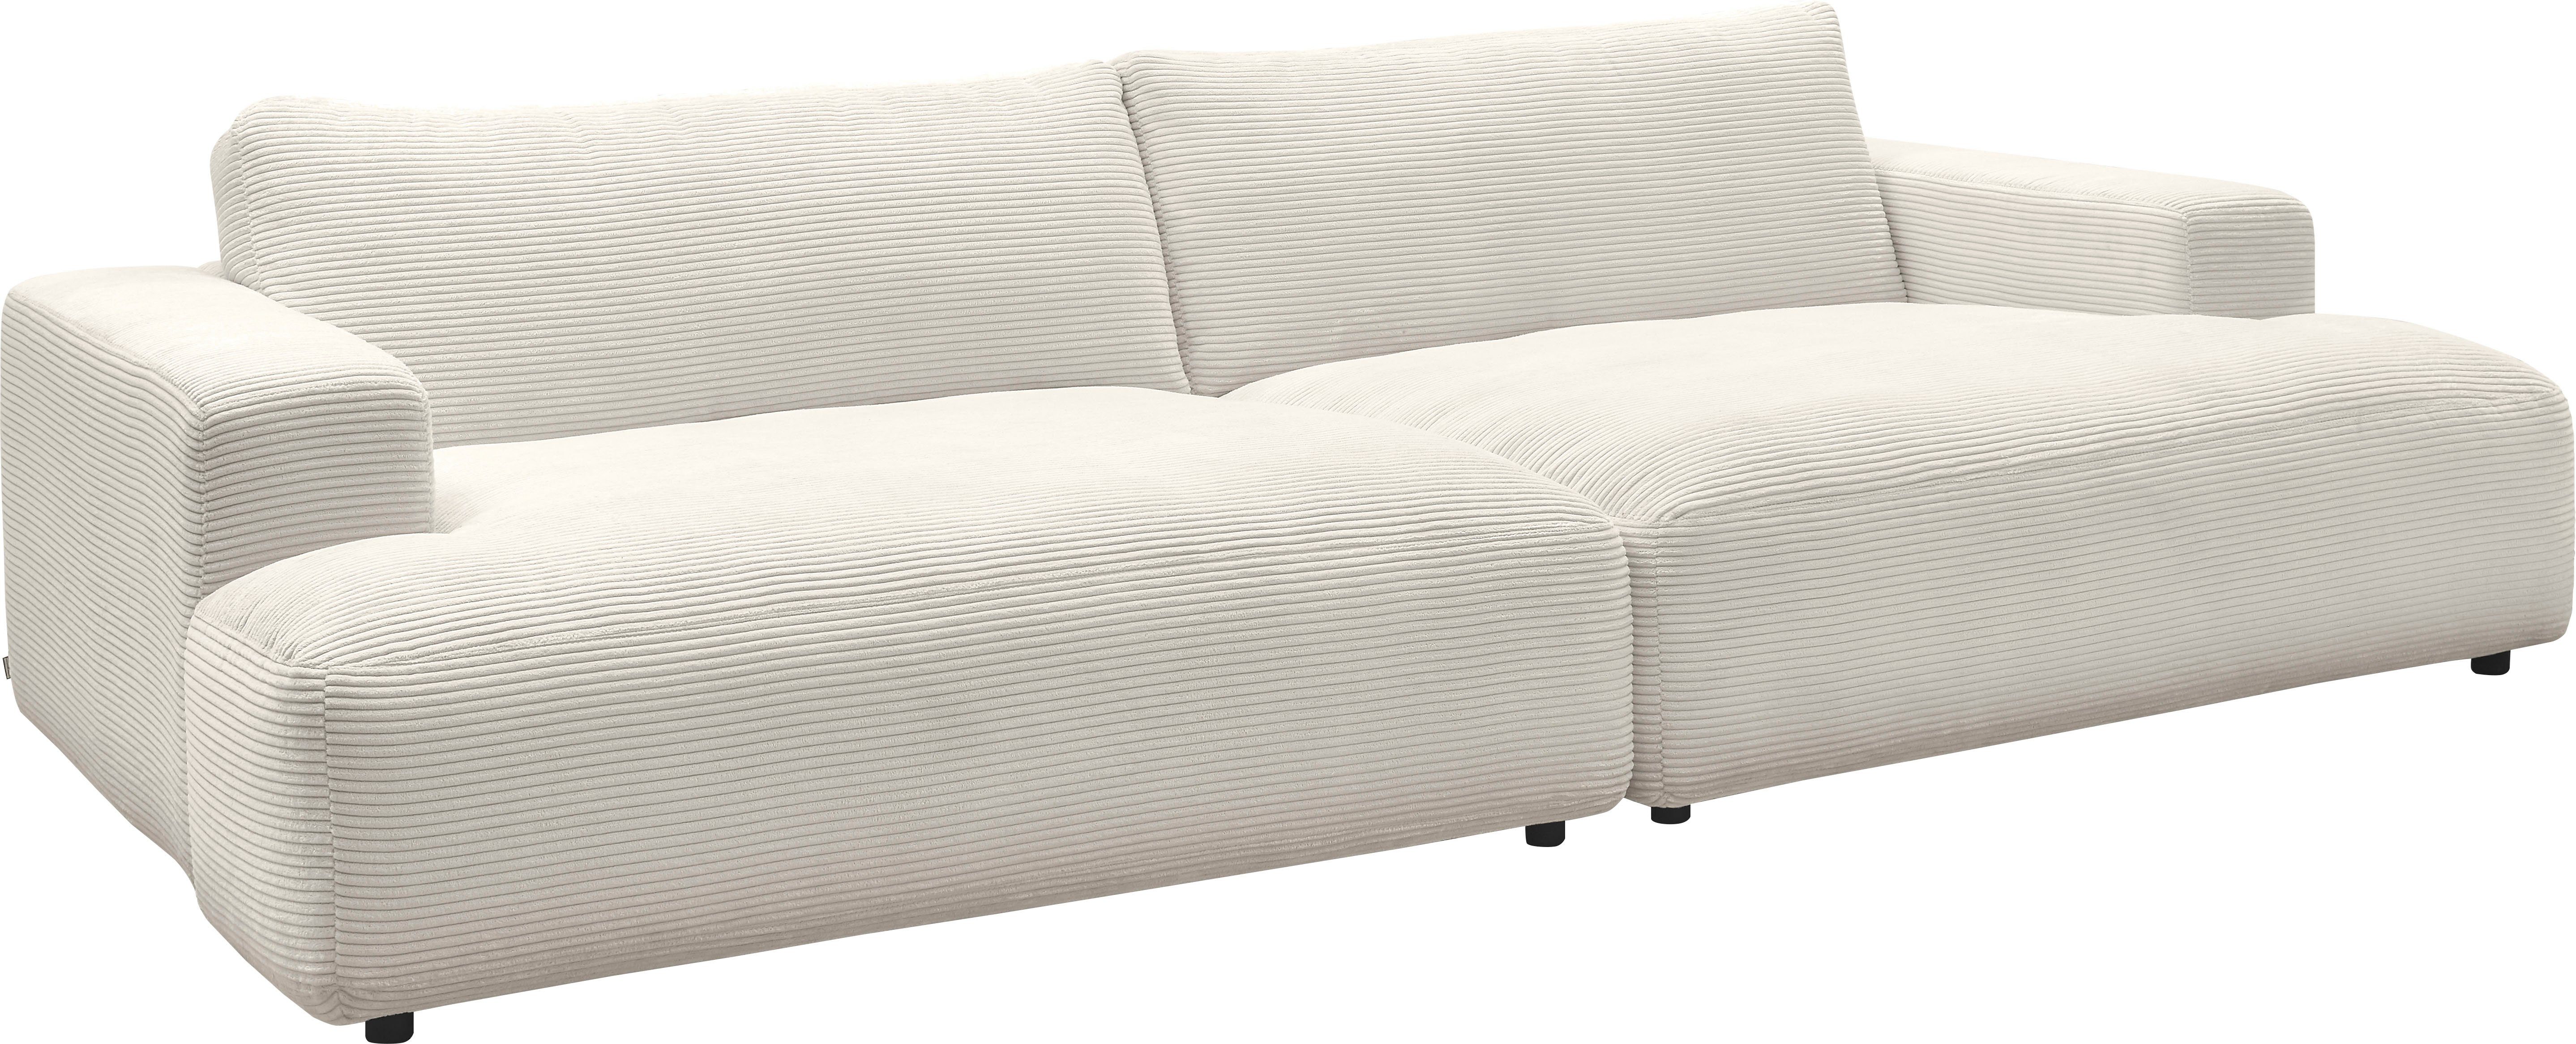 Breite Loungesofa GALLERY branded snow 292 Musterring Cord-Bezug, Lucia, cm M by